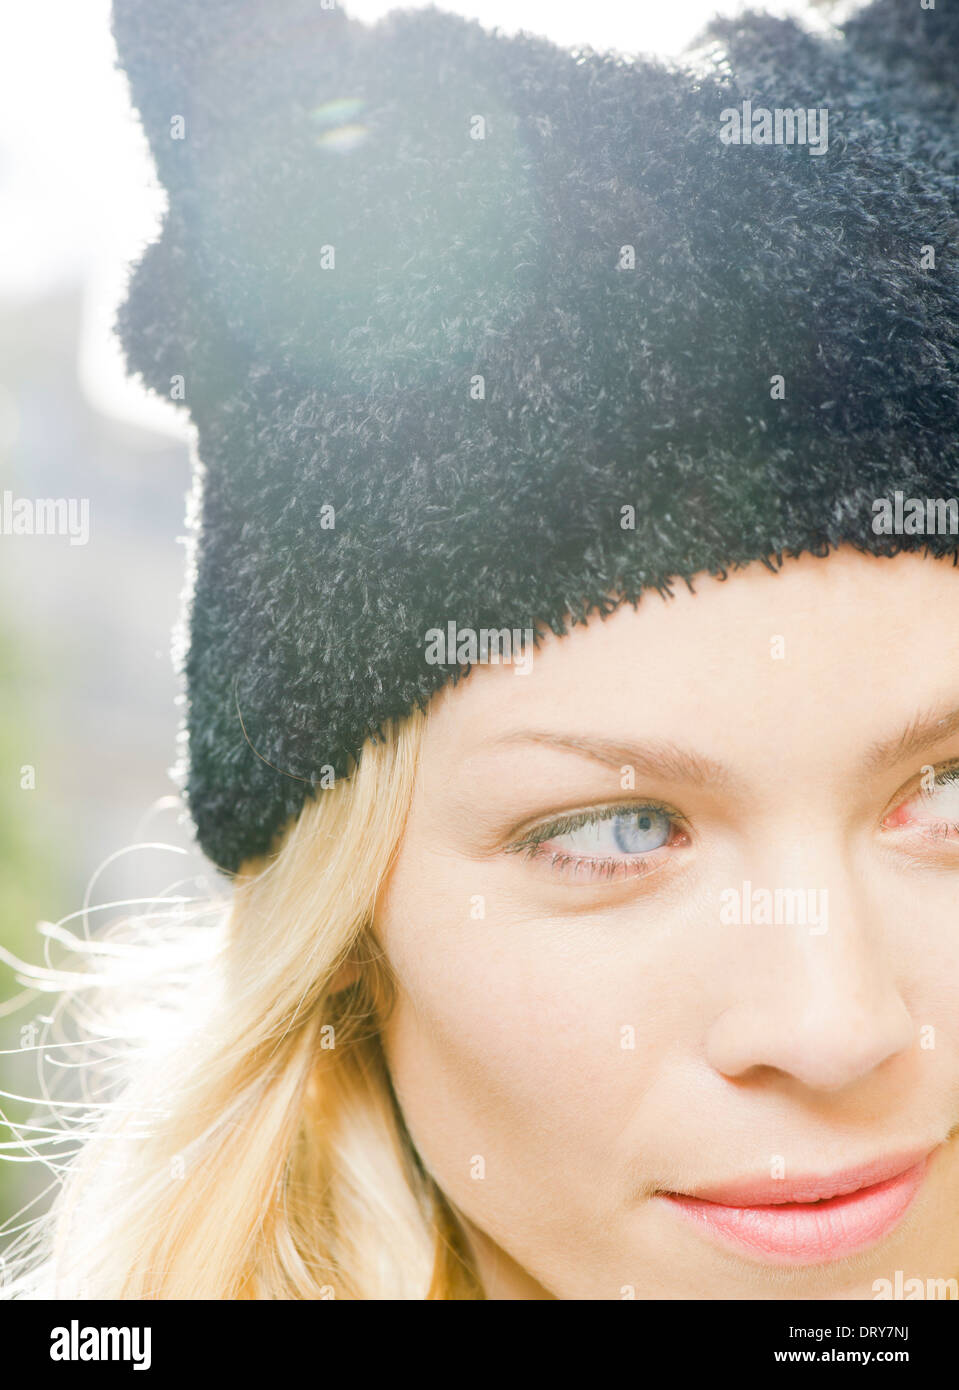 Woman wearing knit hat, looking away in thought, portrait Stock Photo